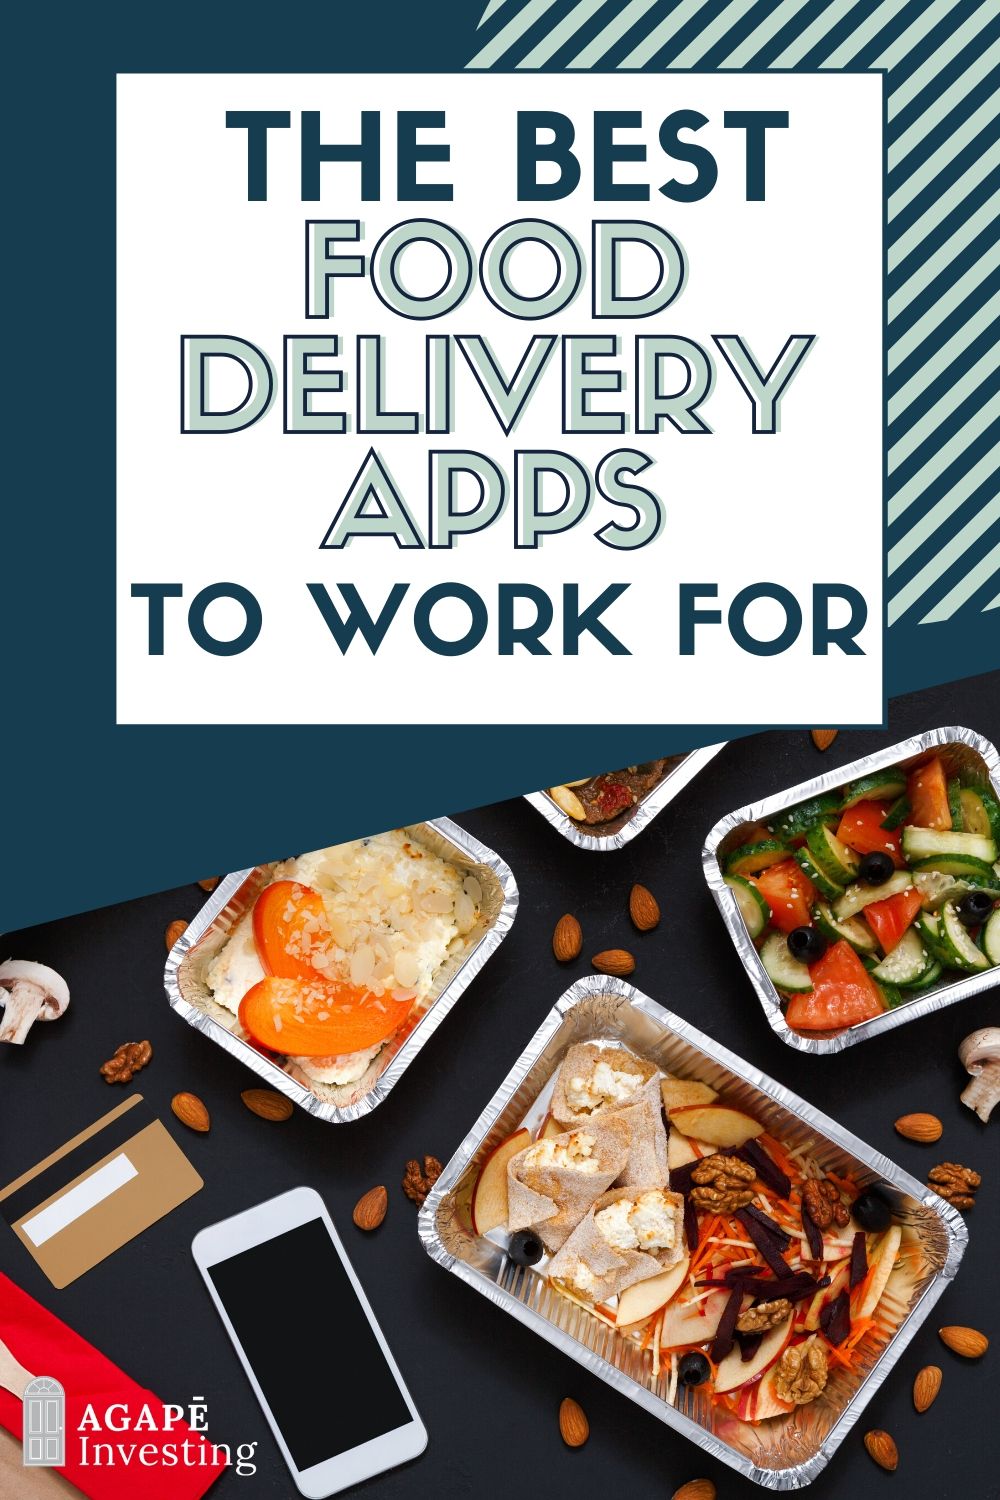 which is the best food delivery service to work for